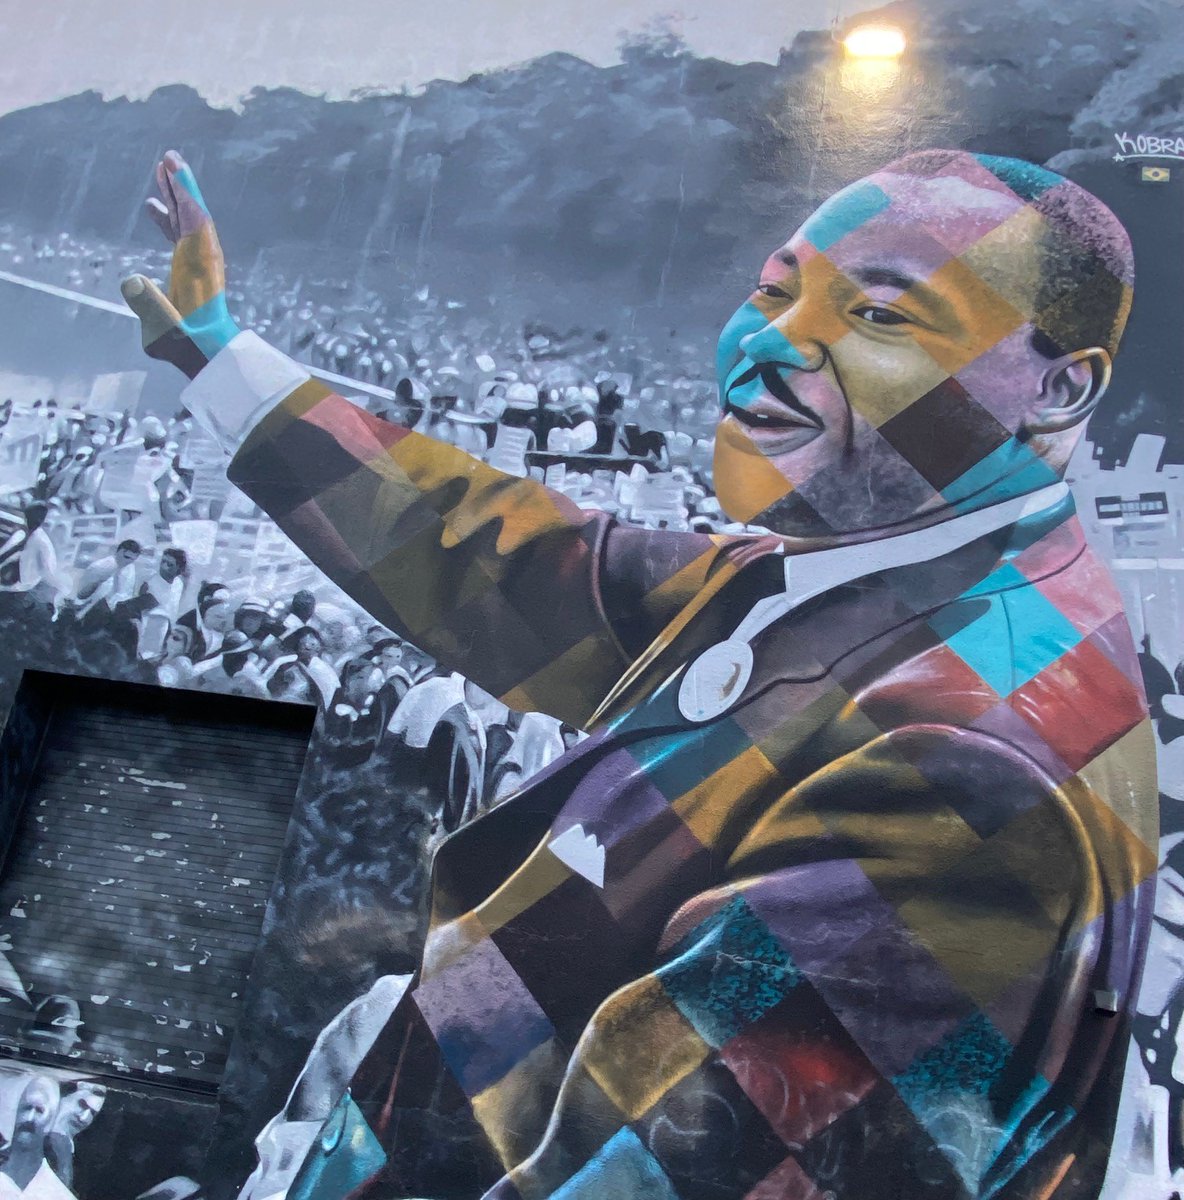 “I have a dream that my four little children will one day live in a nation where they will not be judged by the color of their skin but by the content of their character,” MLK Jr. Artist @kobrastreetart @palmbeachculture building Fla. Photo Rob Nieminen, Group Editorial Director